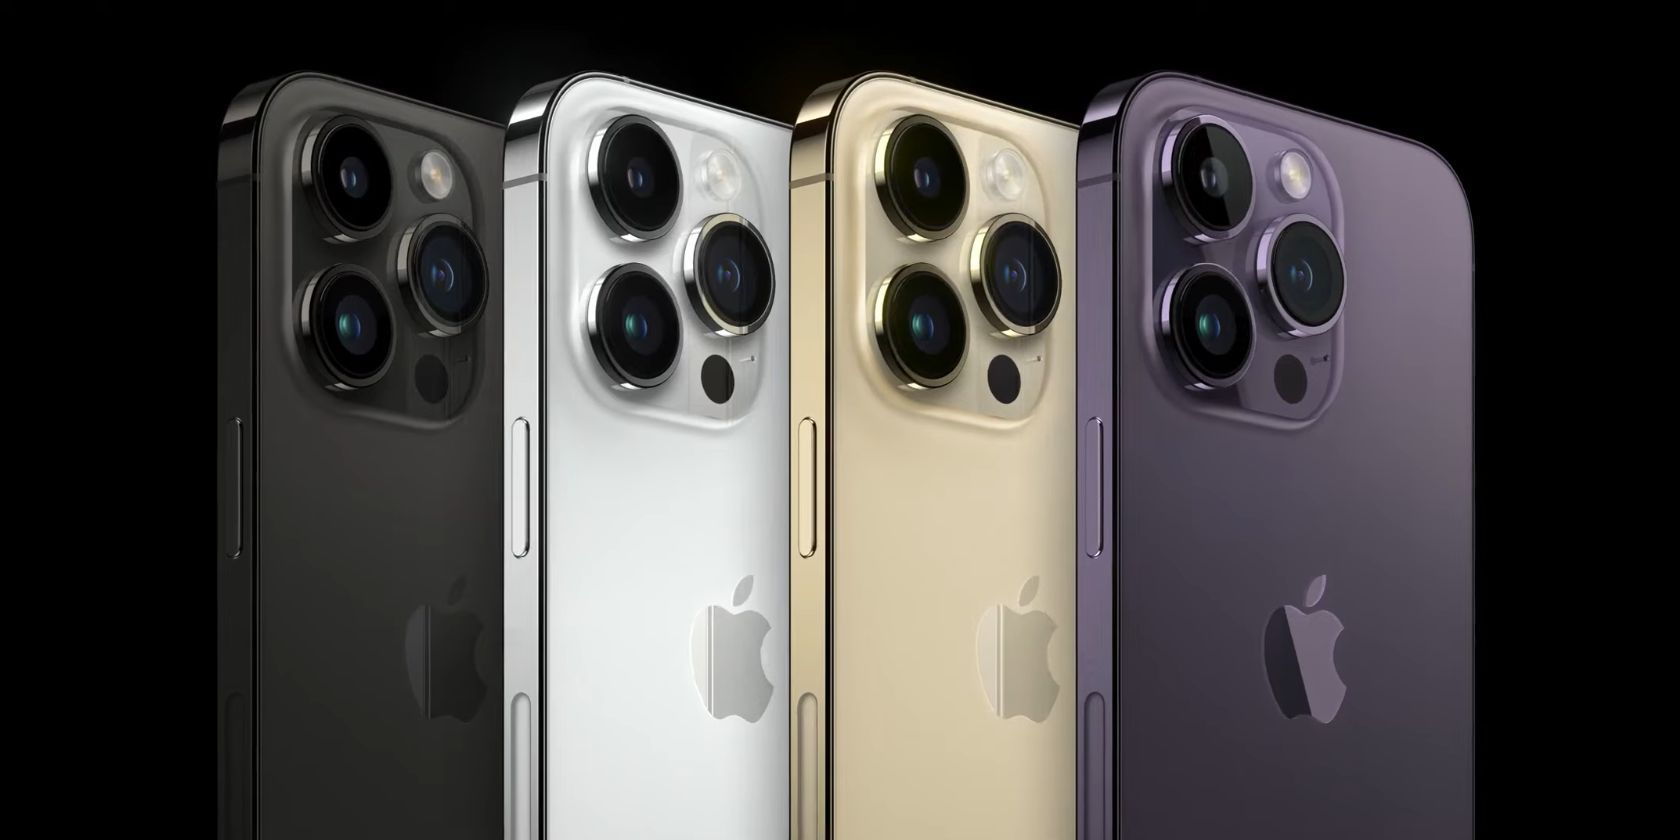 all colors of iphone 14 pro and pro max: space black, silver, gold, deep purple